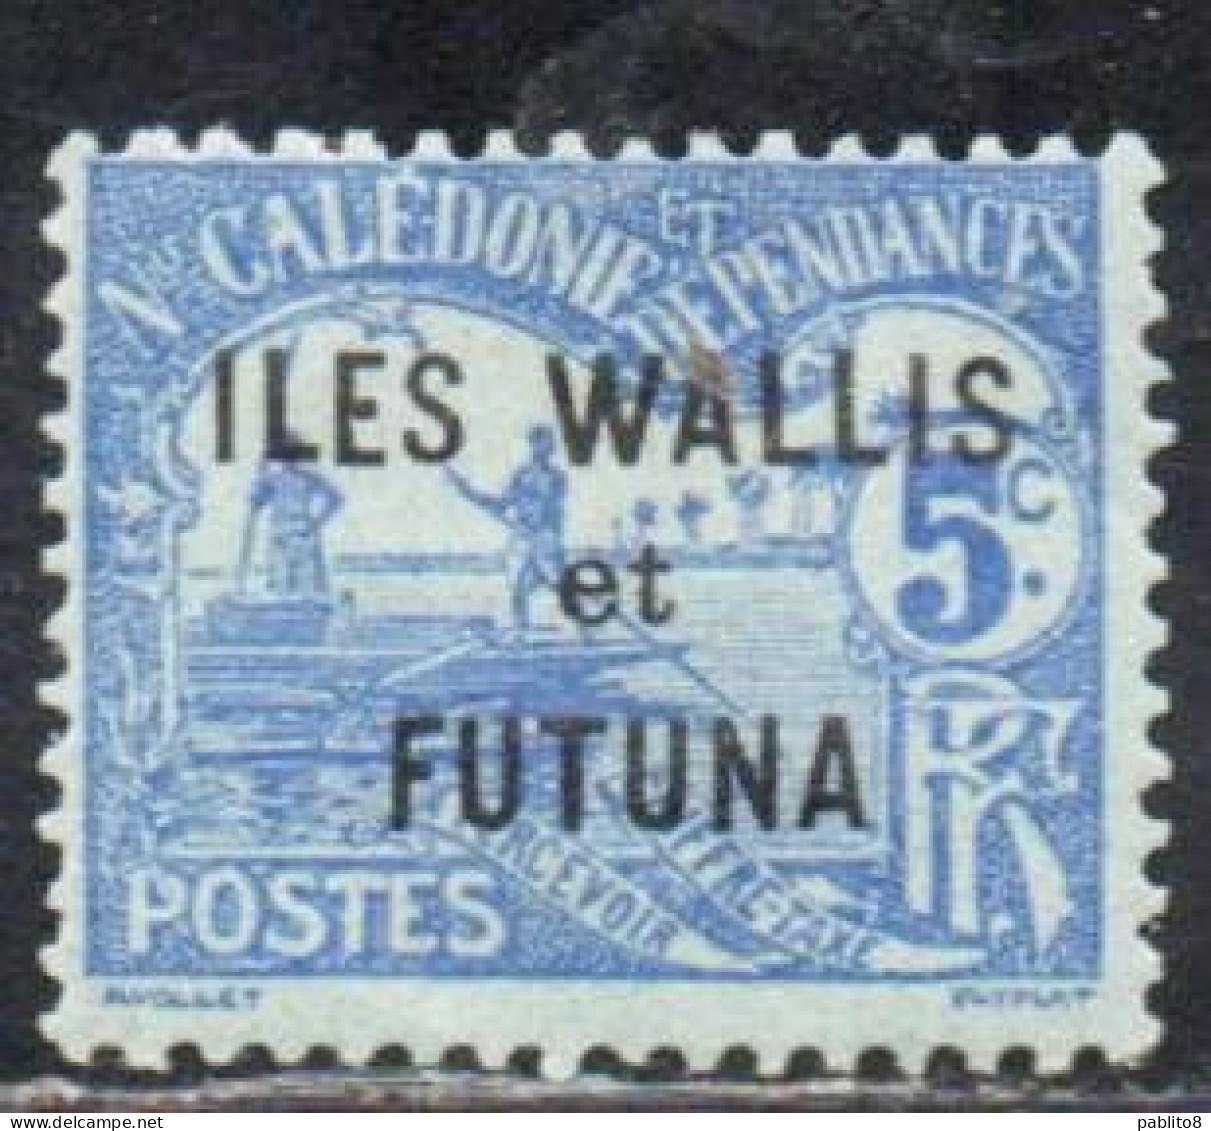 WALLIS AND FUTUNA ISLANDS 1920 POSTAGE DUE STAMPS TAXE SEGNATASSE MEN POLING BOAT NEW CALEDONIA OVERPRINTED 5c MH - Impuestos